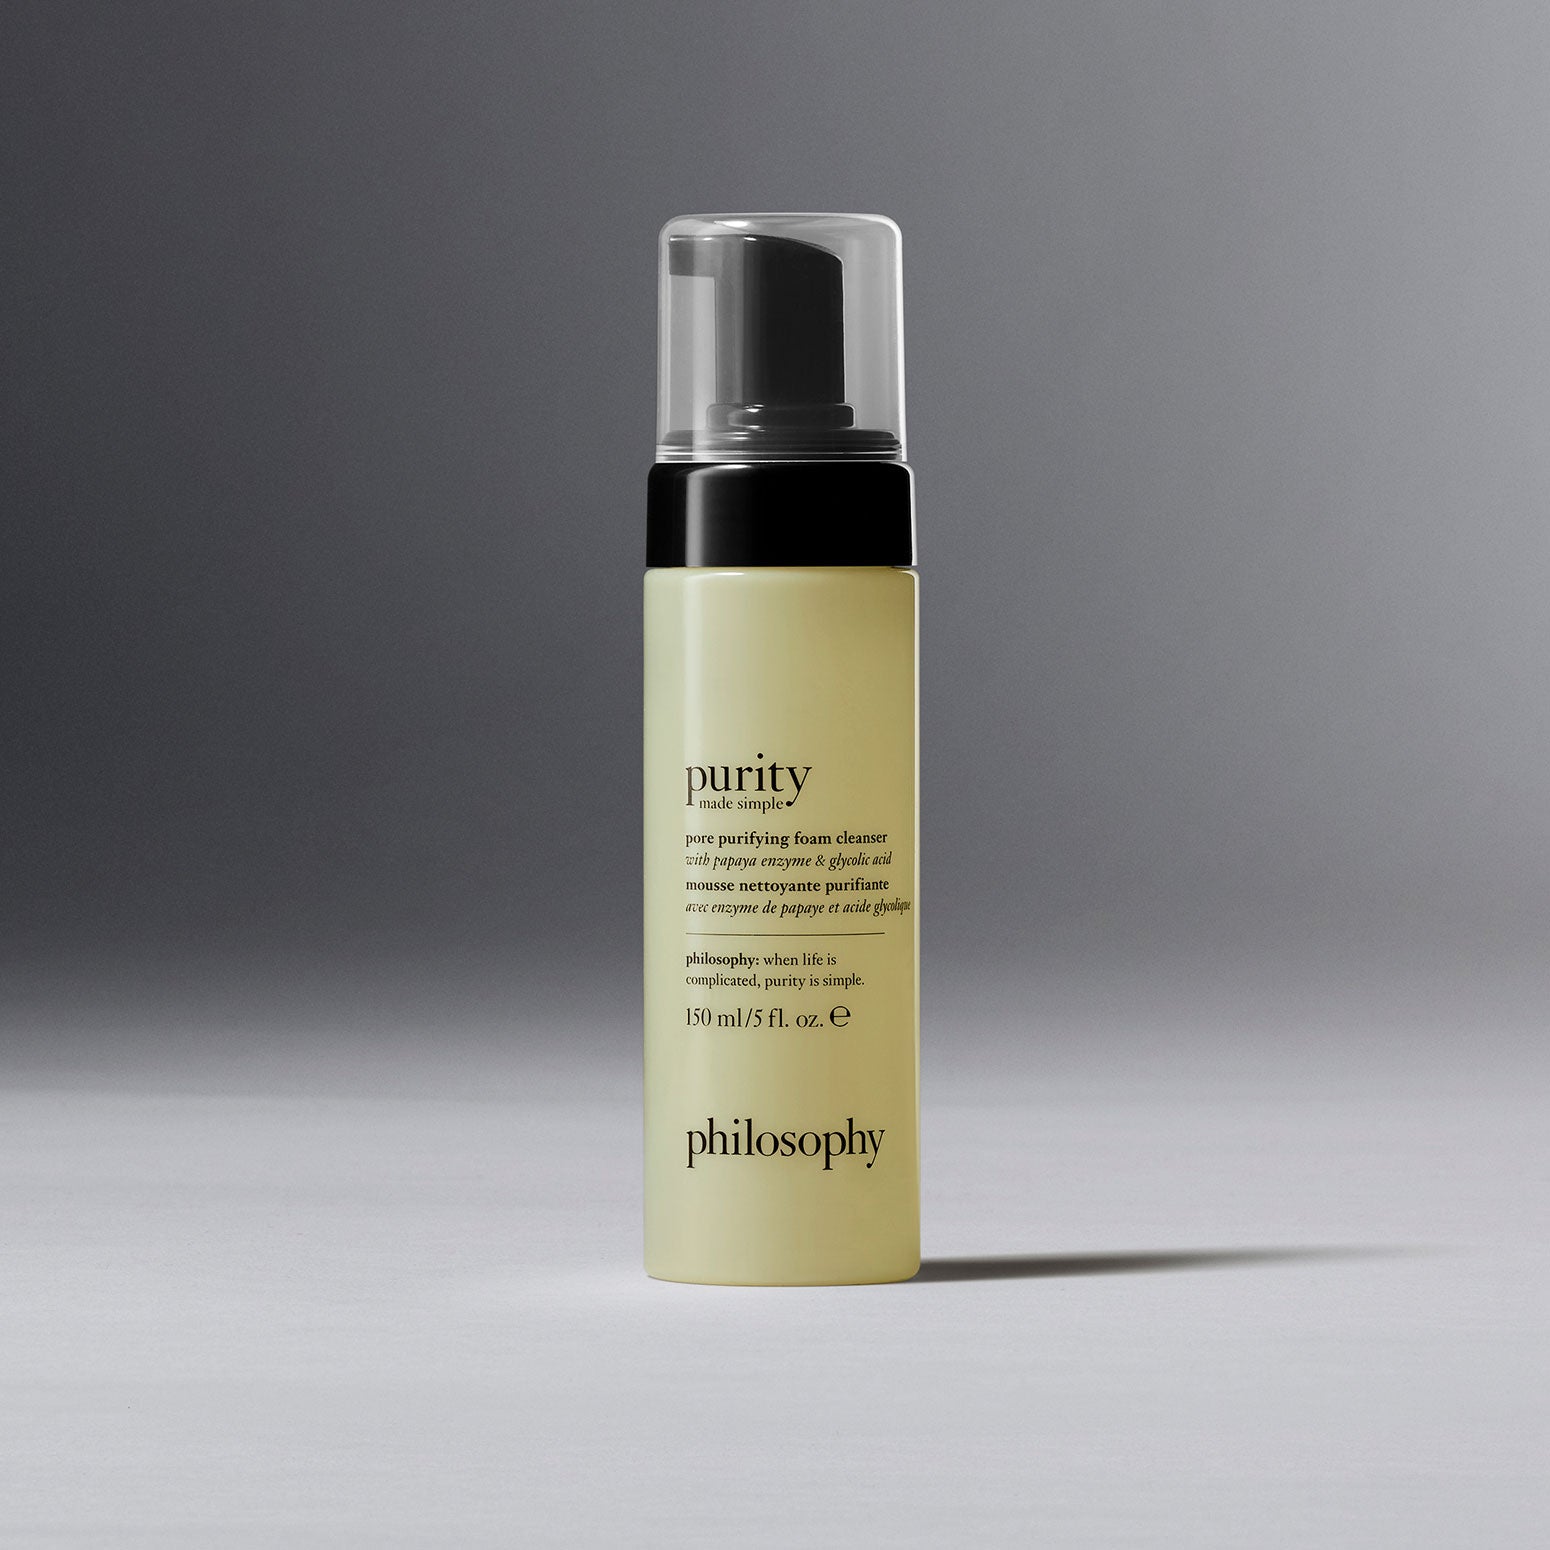 Philosophy - Purity Made Simple Pore Purifying Foam Cleanser 5 oz.